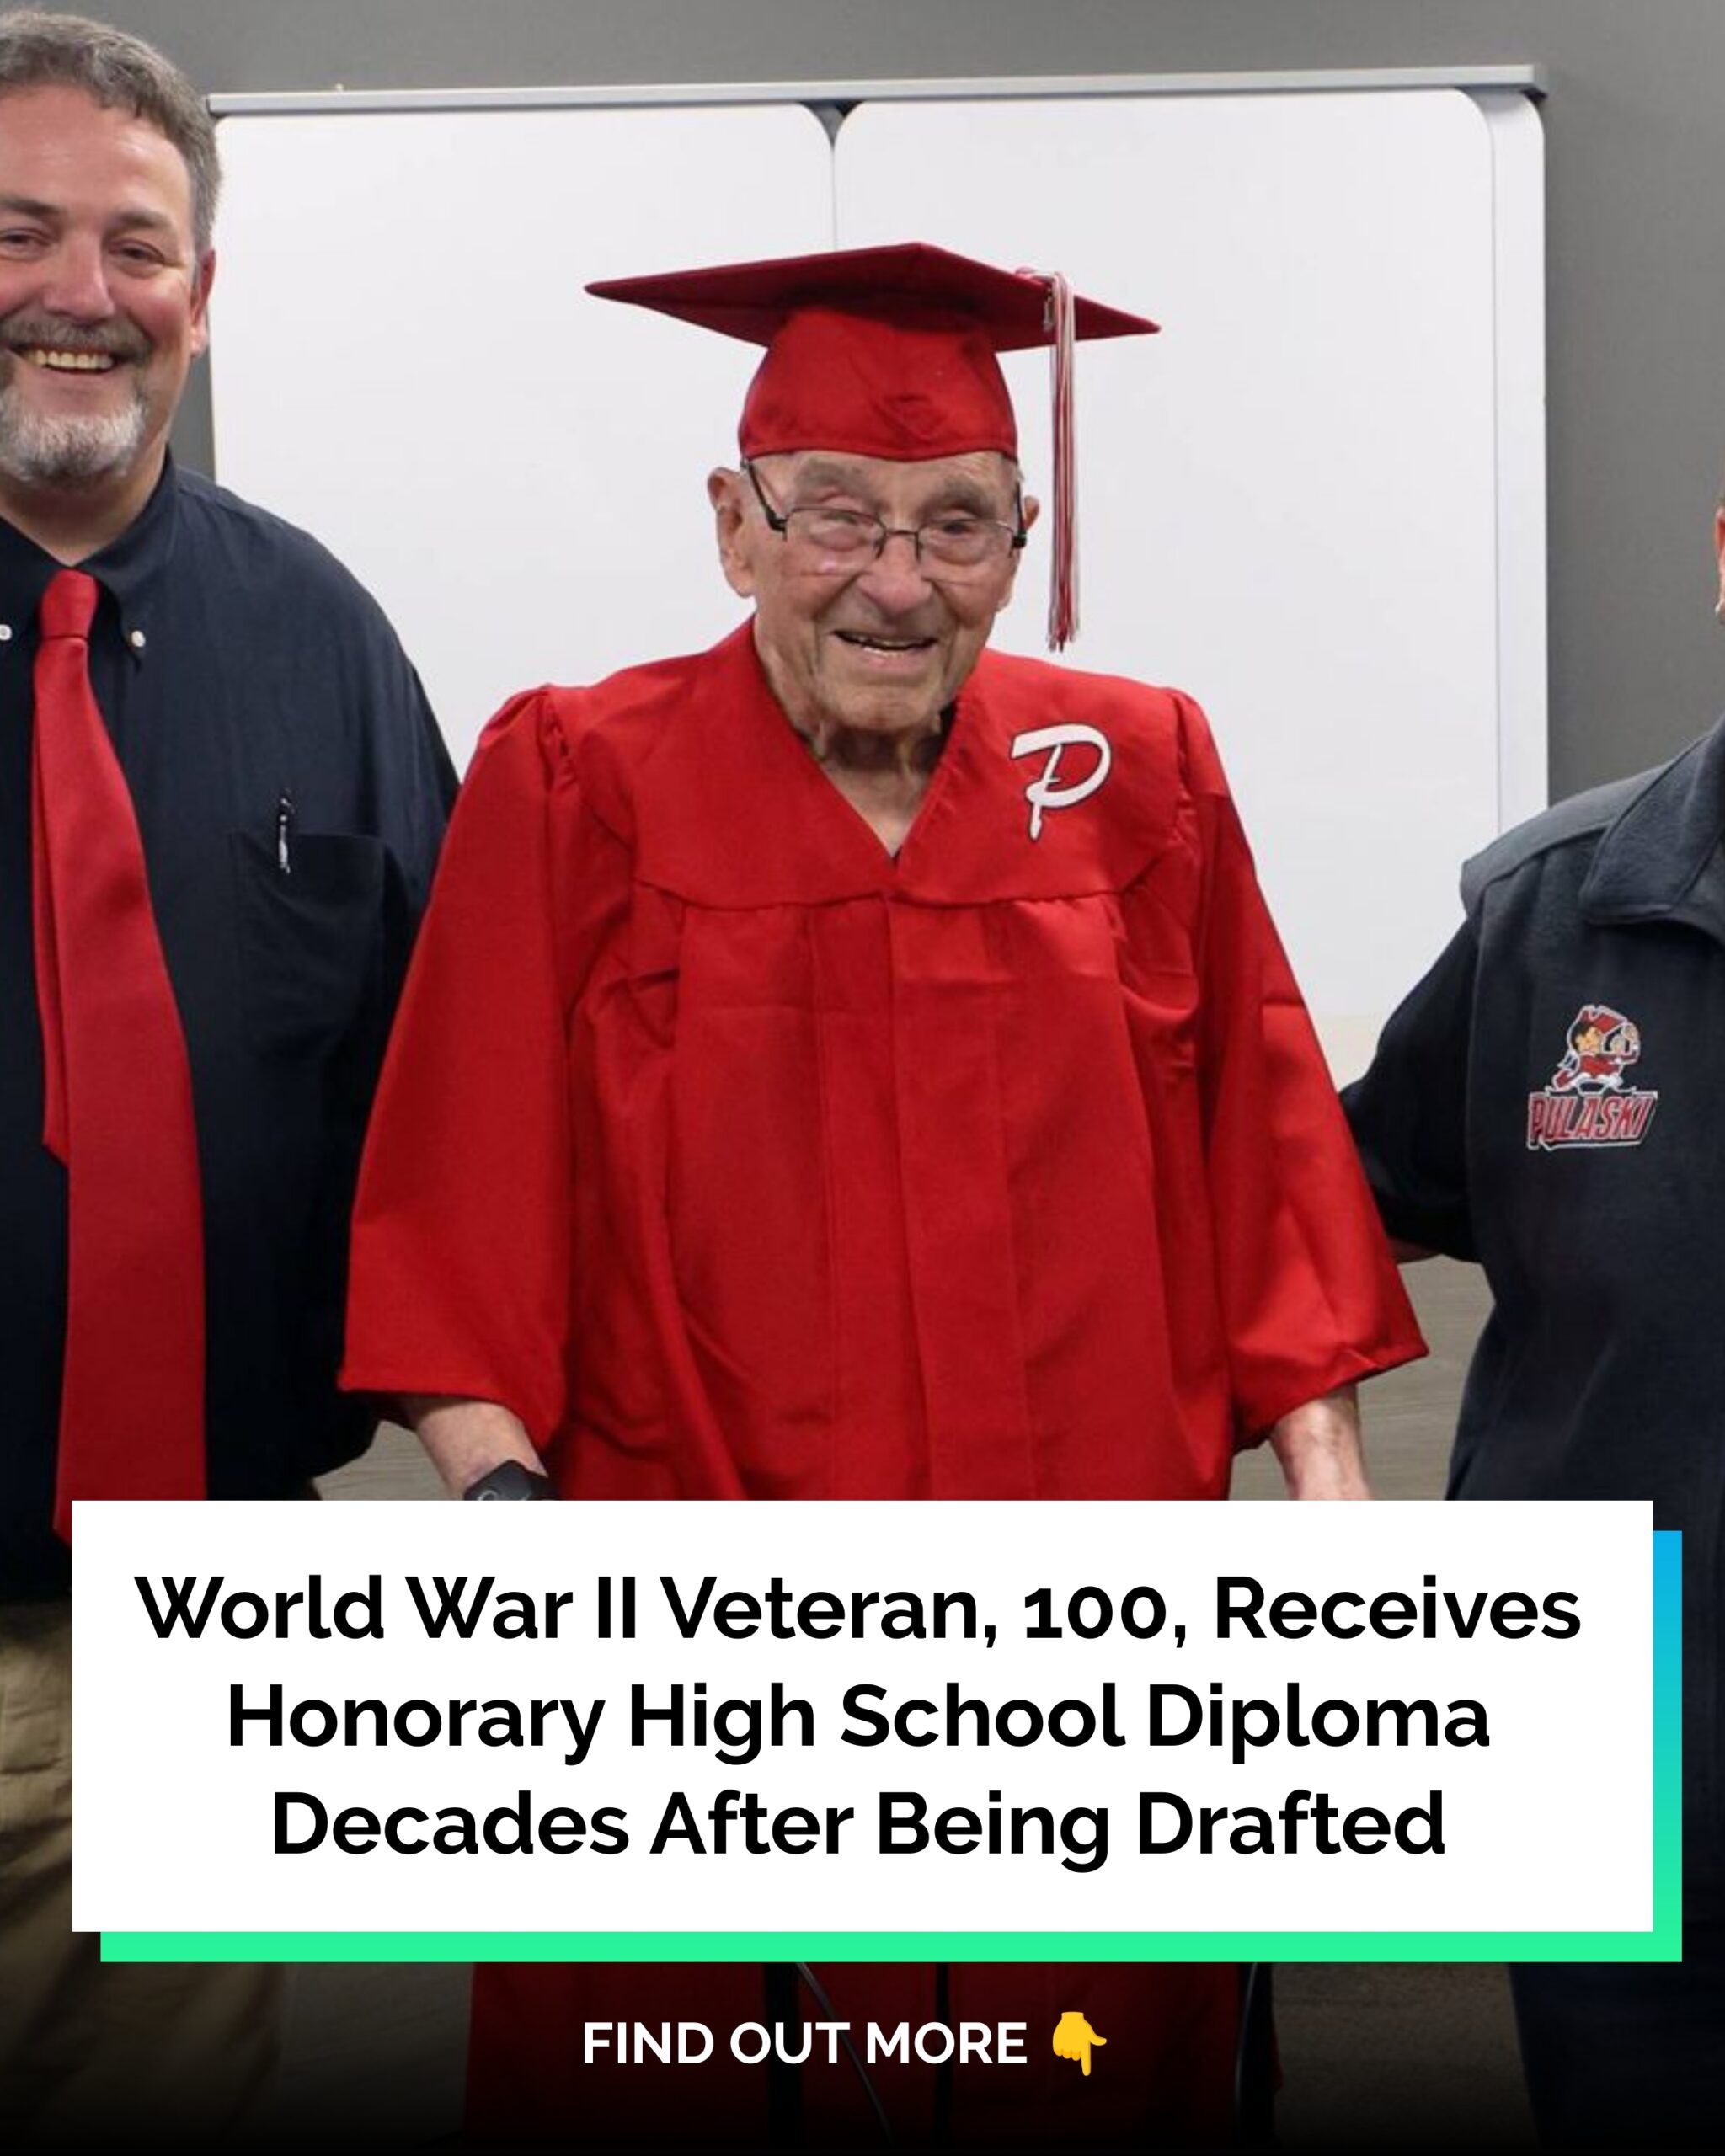 World War II Veteran, 100, Receives Honorary High School Diploma Decades After Being Drafted